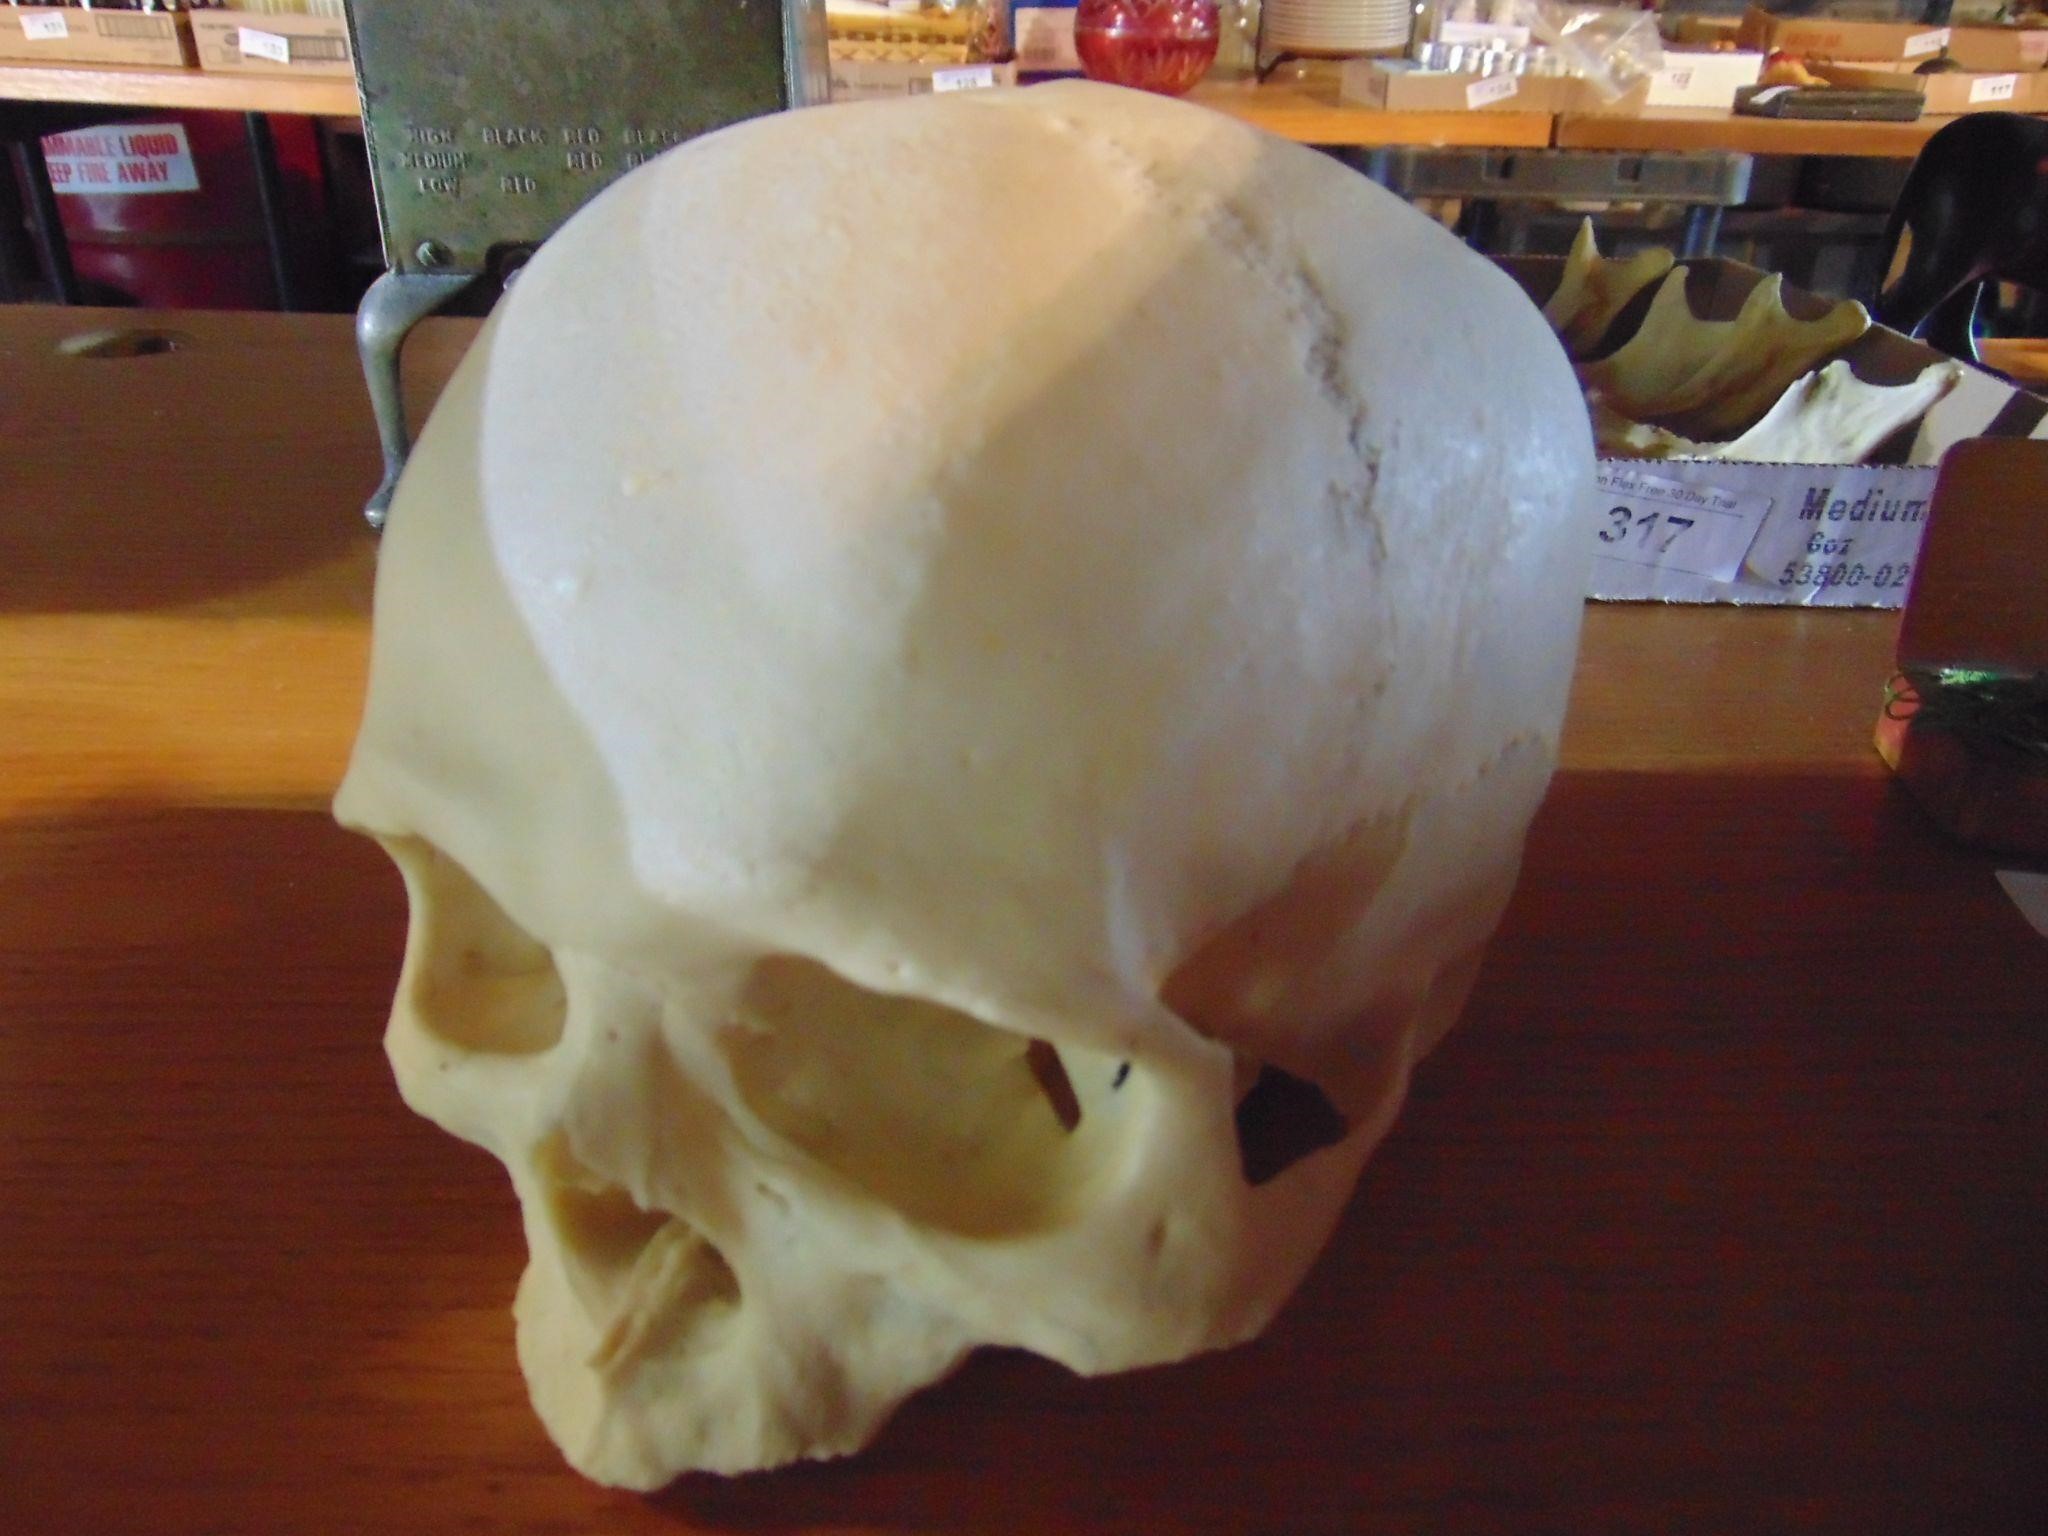 Another Old Childs Skull, missing lower jaw